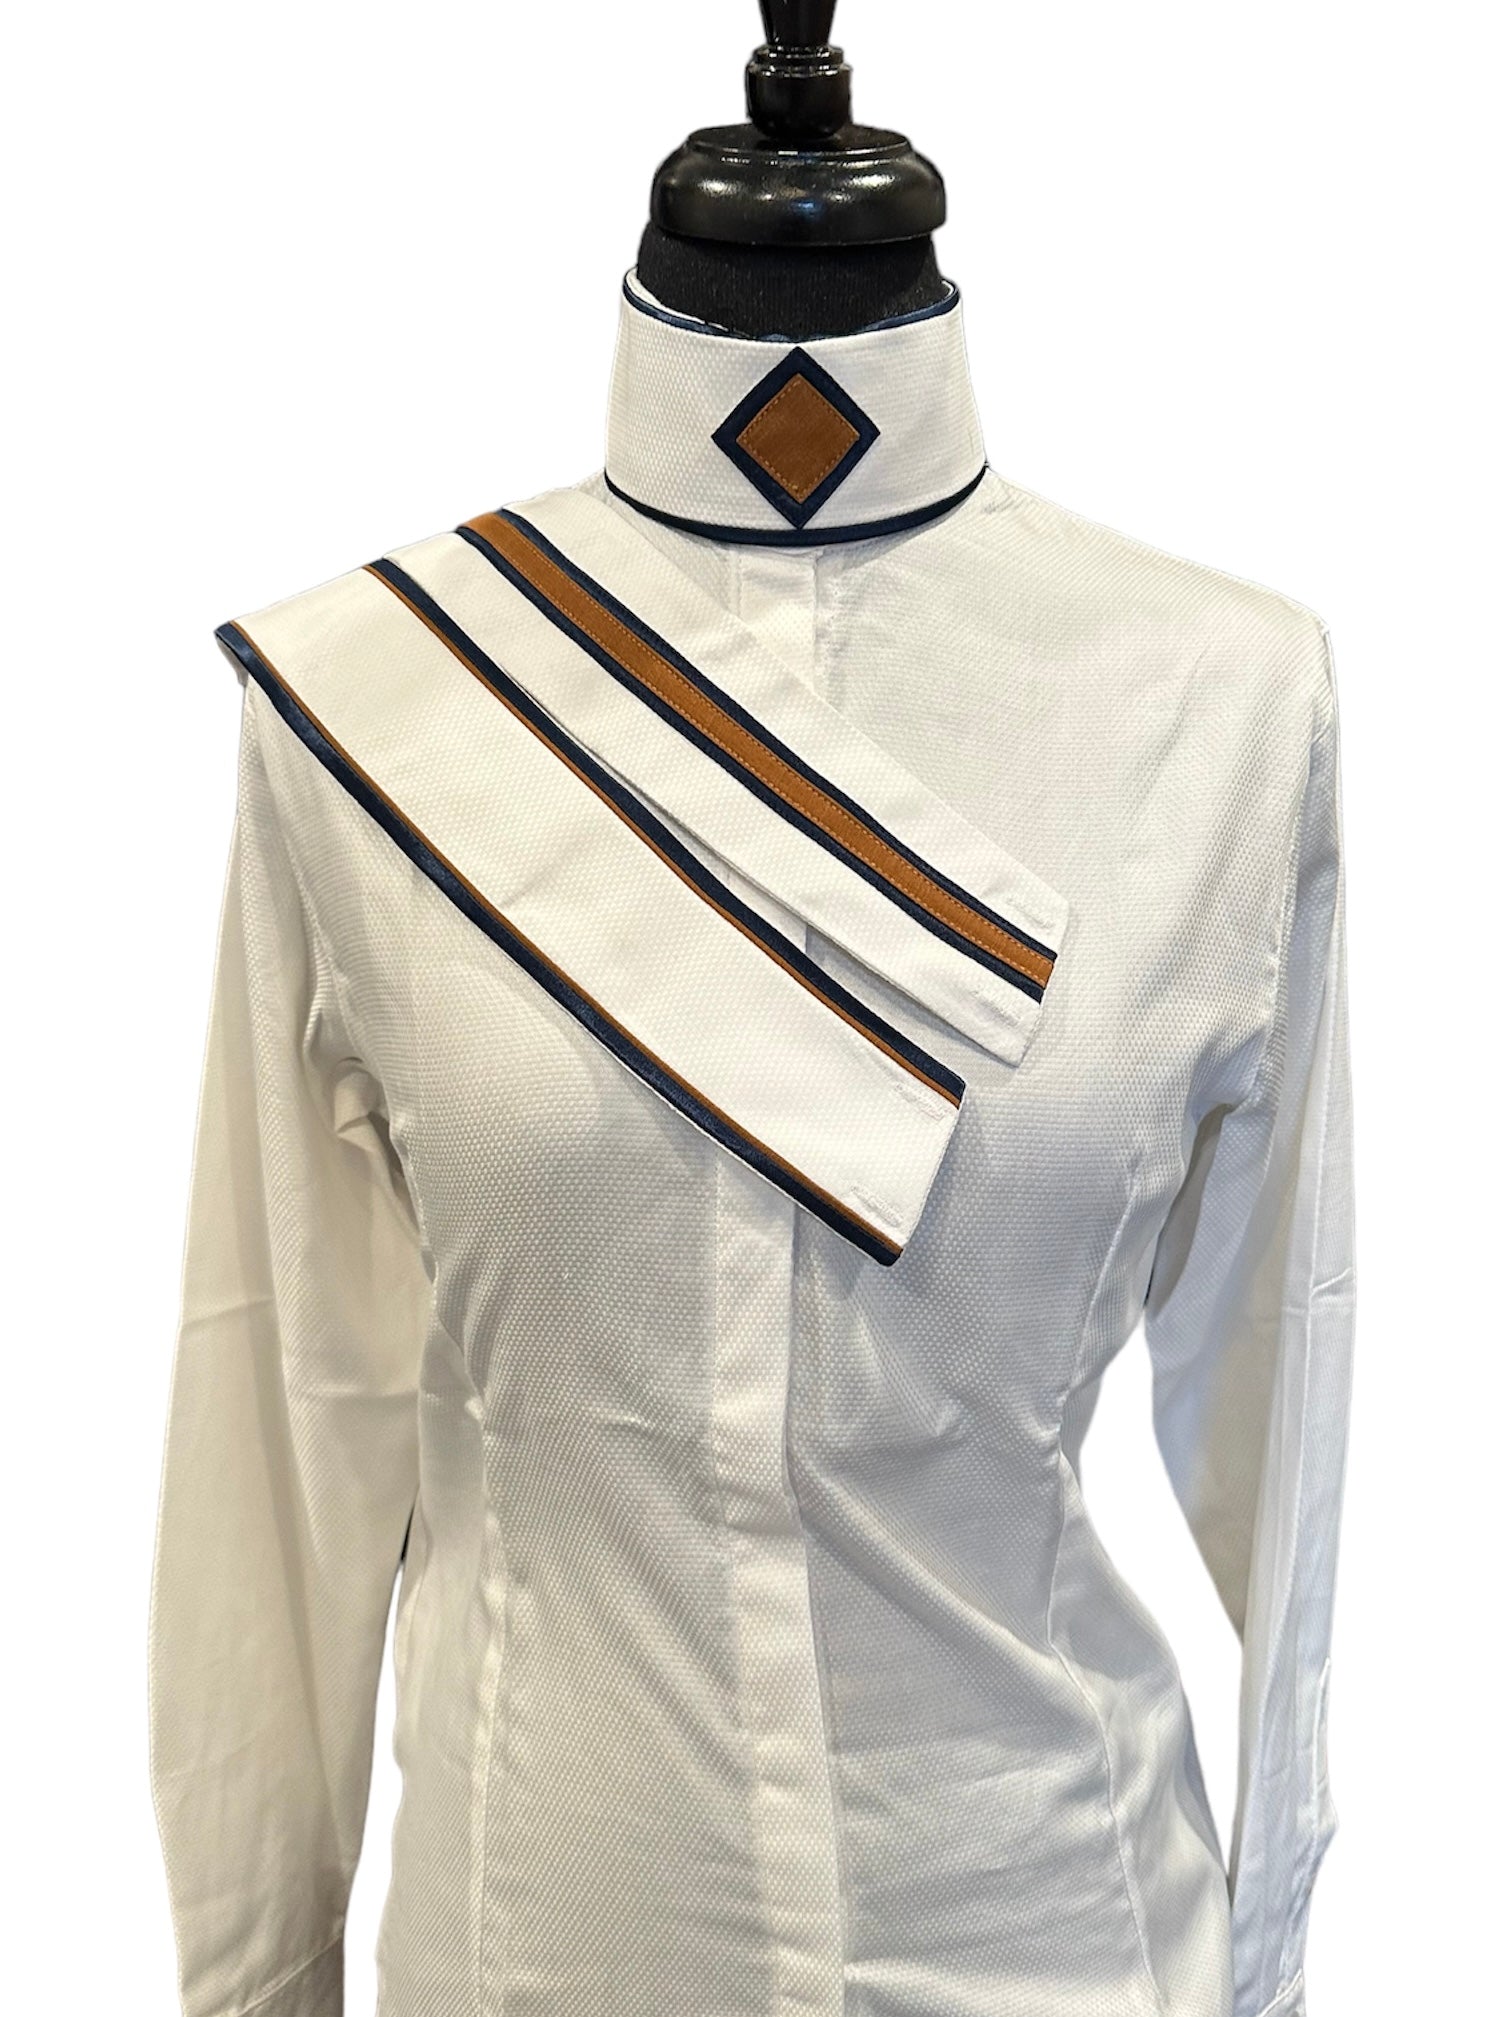 English Show Shirt White with Navy and Rust Accents Fabric Code V24